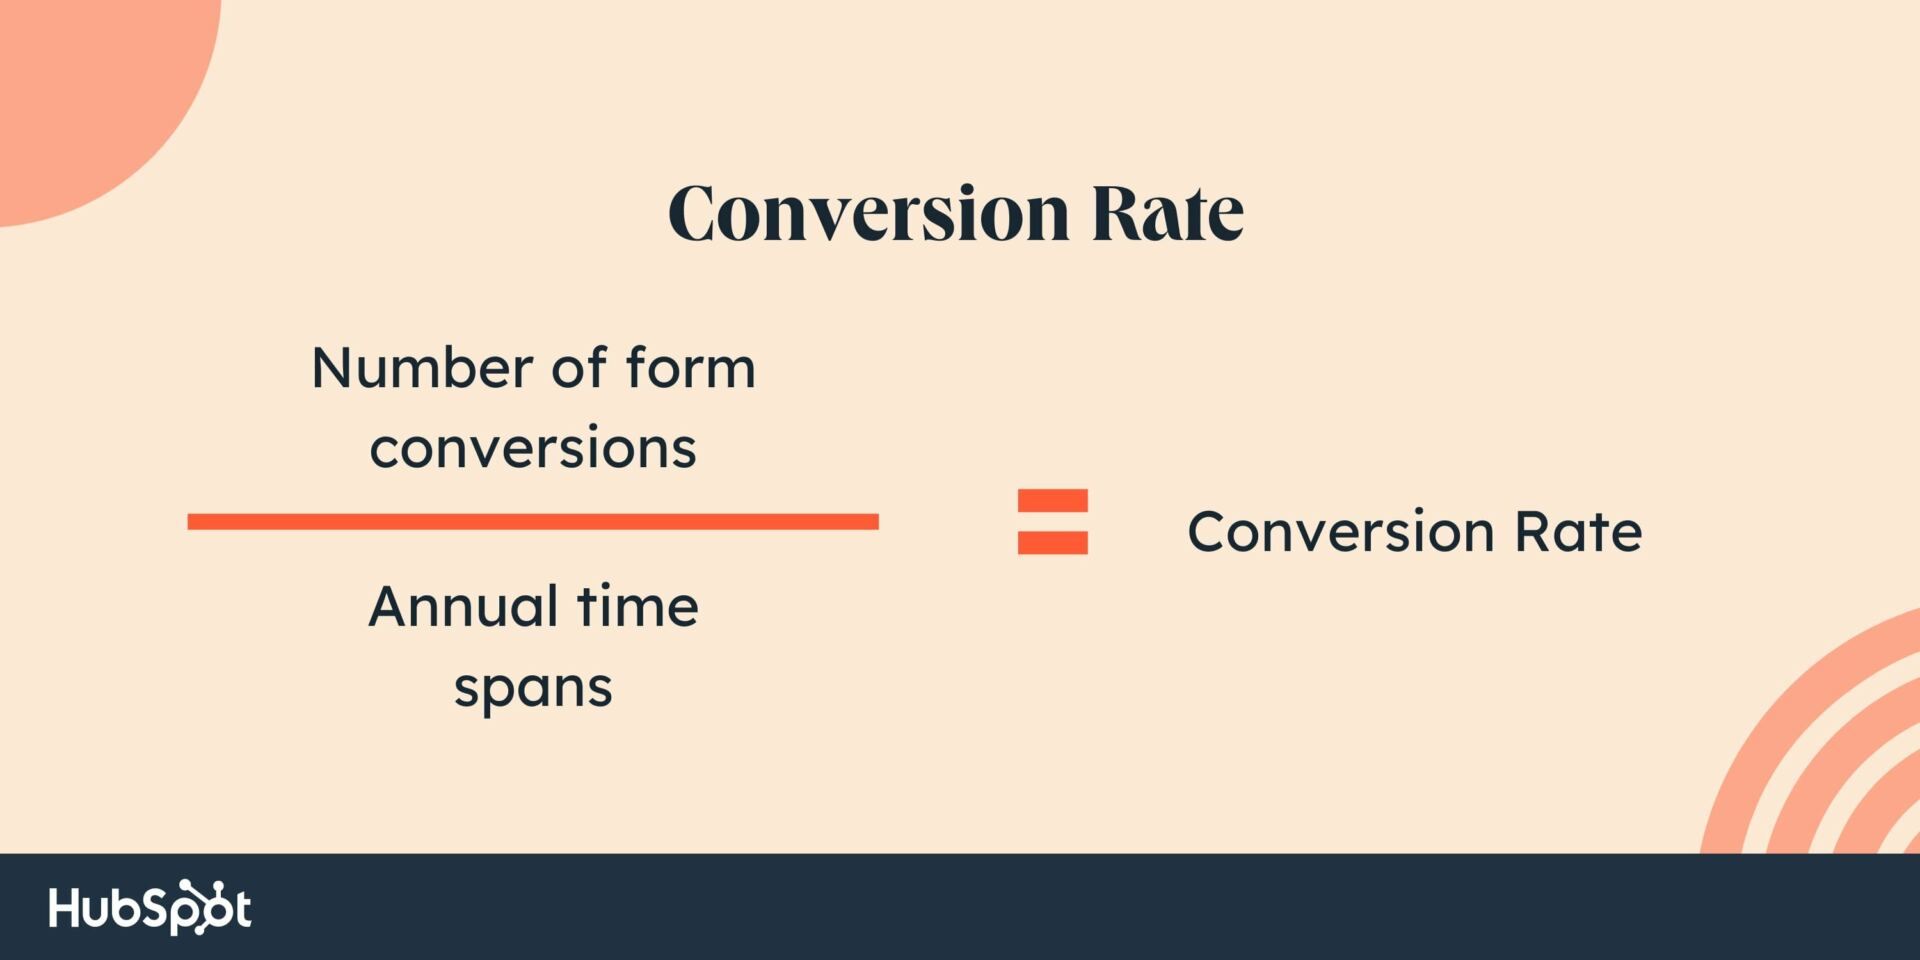 Newsletter sign-up form examples, Conversion rate formula